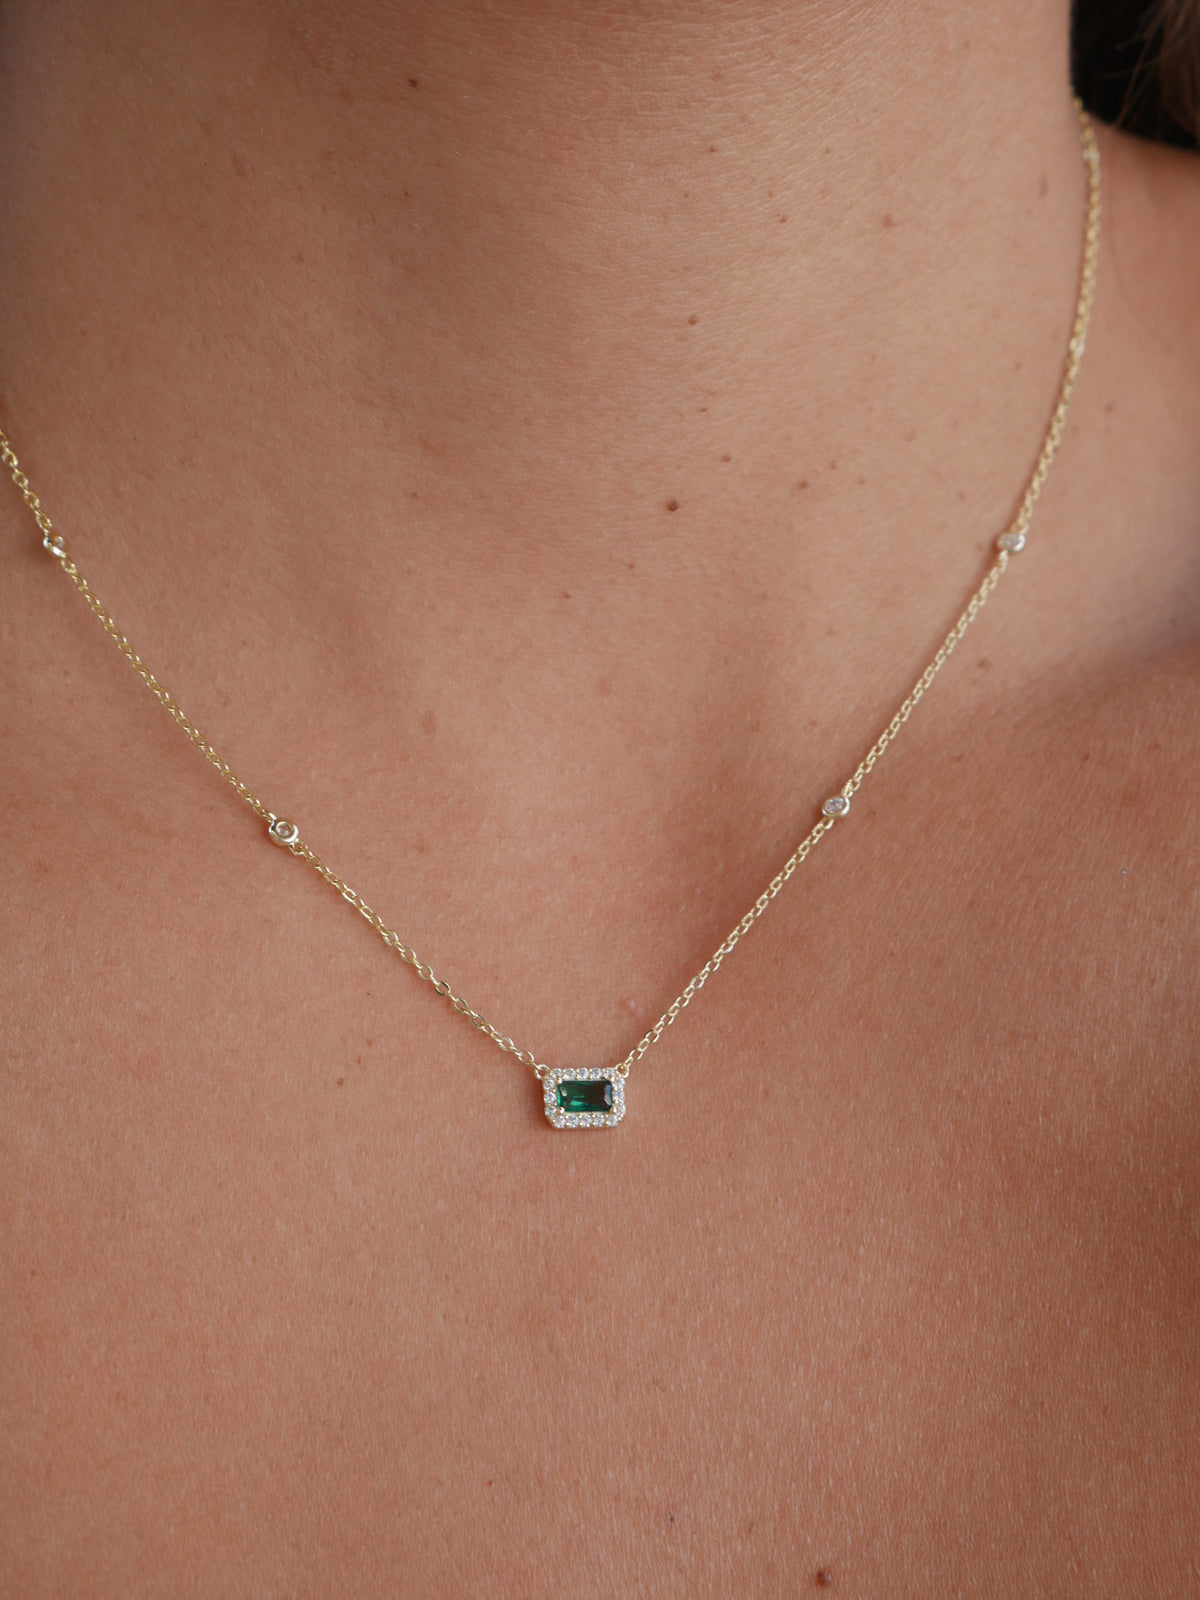 gold and green dainty necklace emerald green necklaces wedding and bridesmaids jewelry everyday necklaces plain gift ideas influencer style jewelry rectangle necklace gold and green popular trending necklaces fashionable for layering short necklaces Kesley Boutique